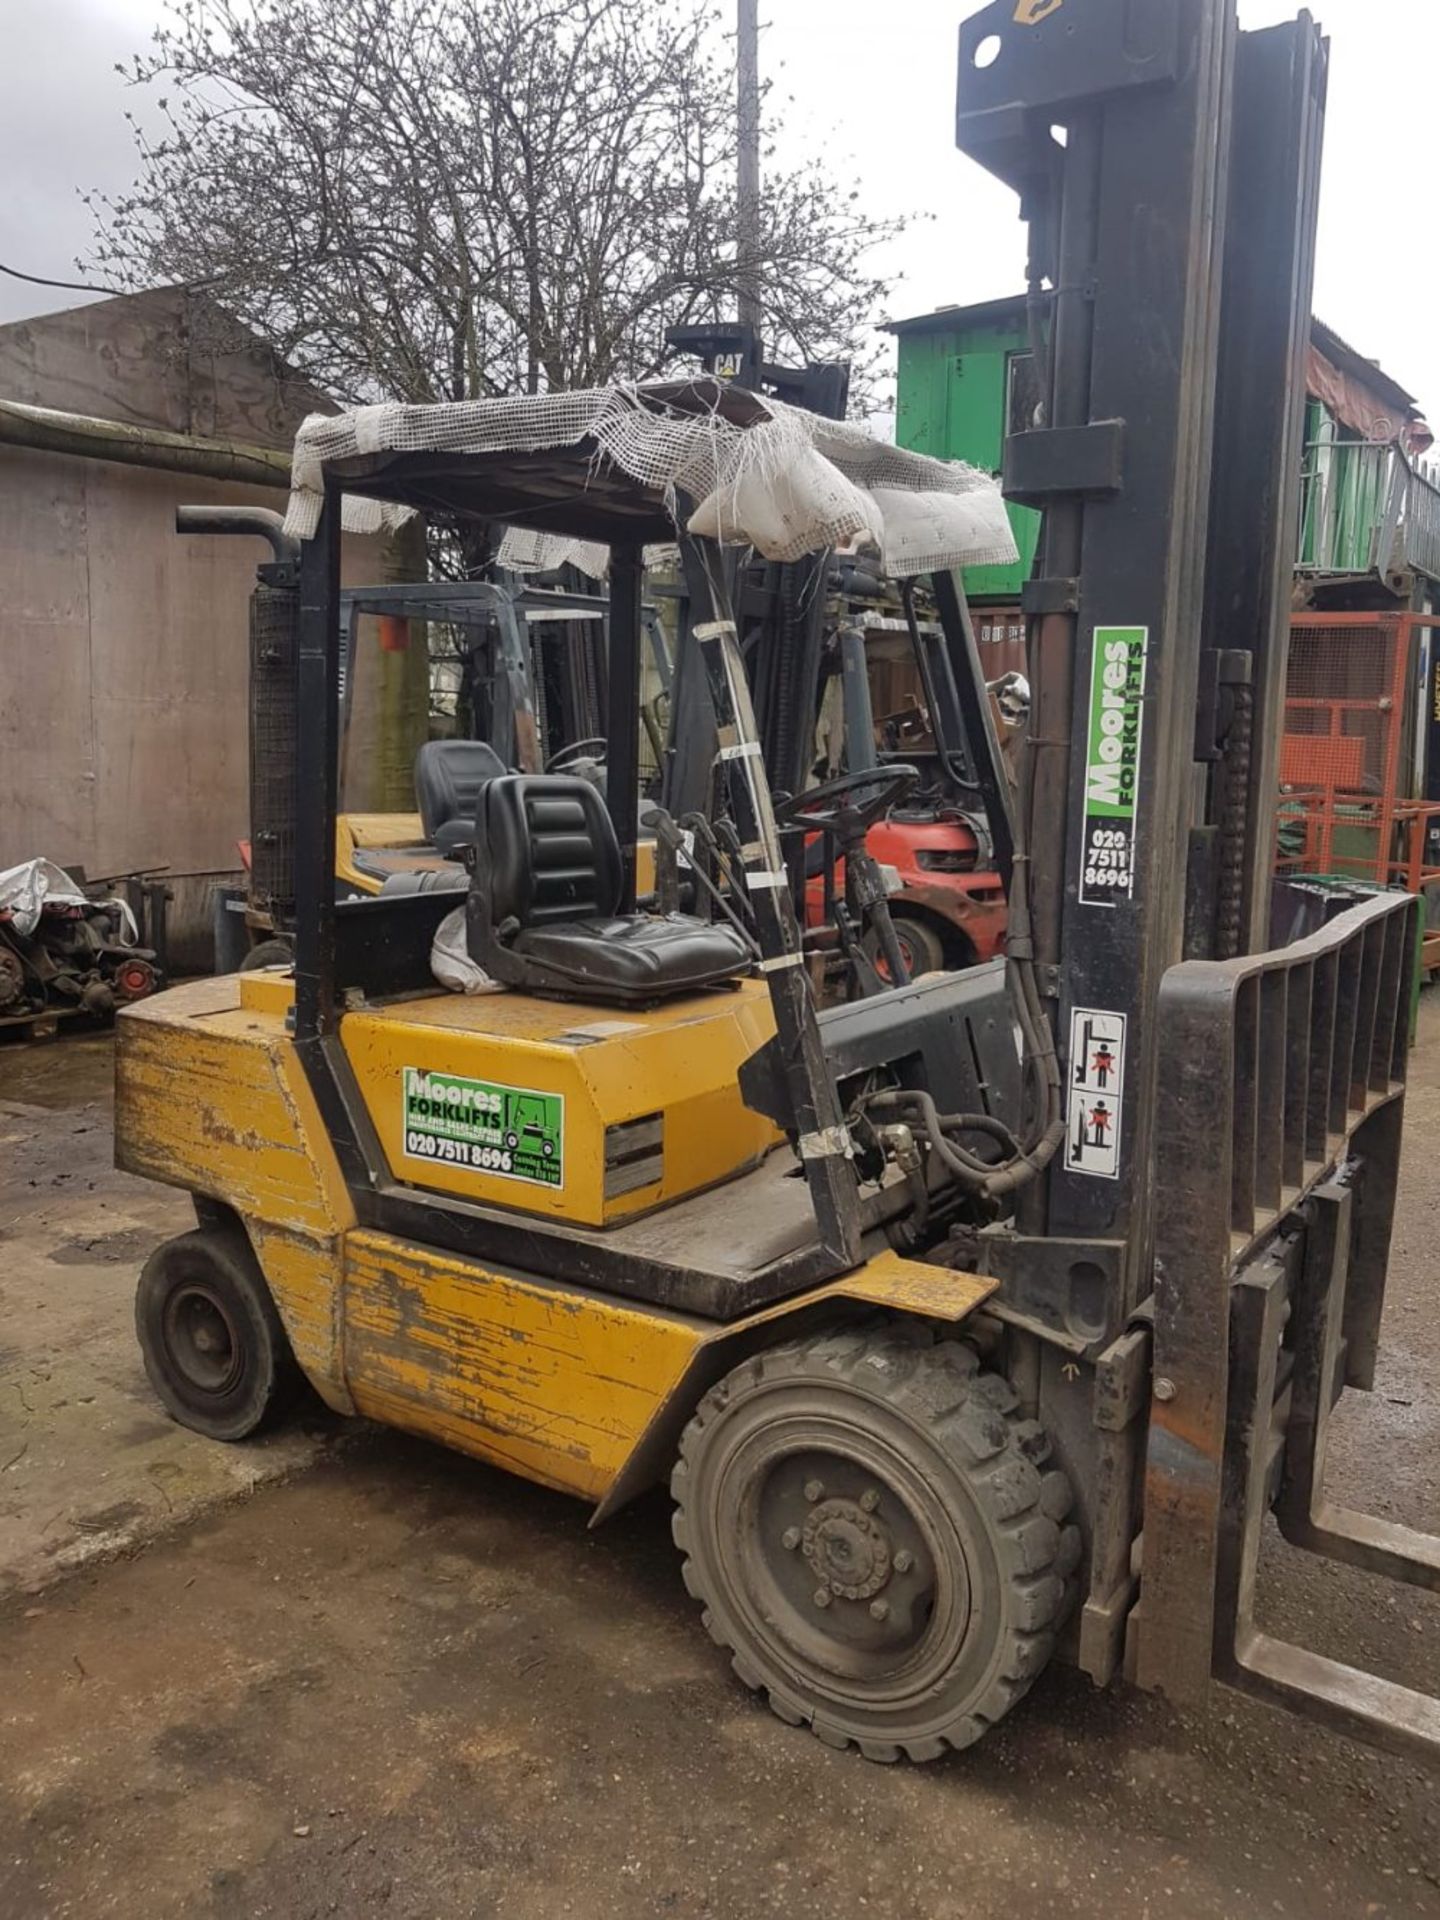 BOSS 3 TONNE DIESEL FORKLIFT TRUCK WITH TRIPKLE MAST AND SIDE SHIFT. BRAKES POOR AND NEED